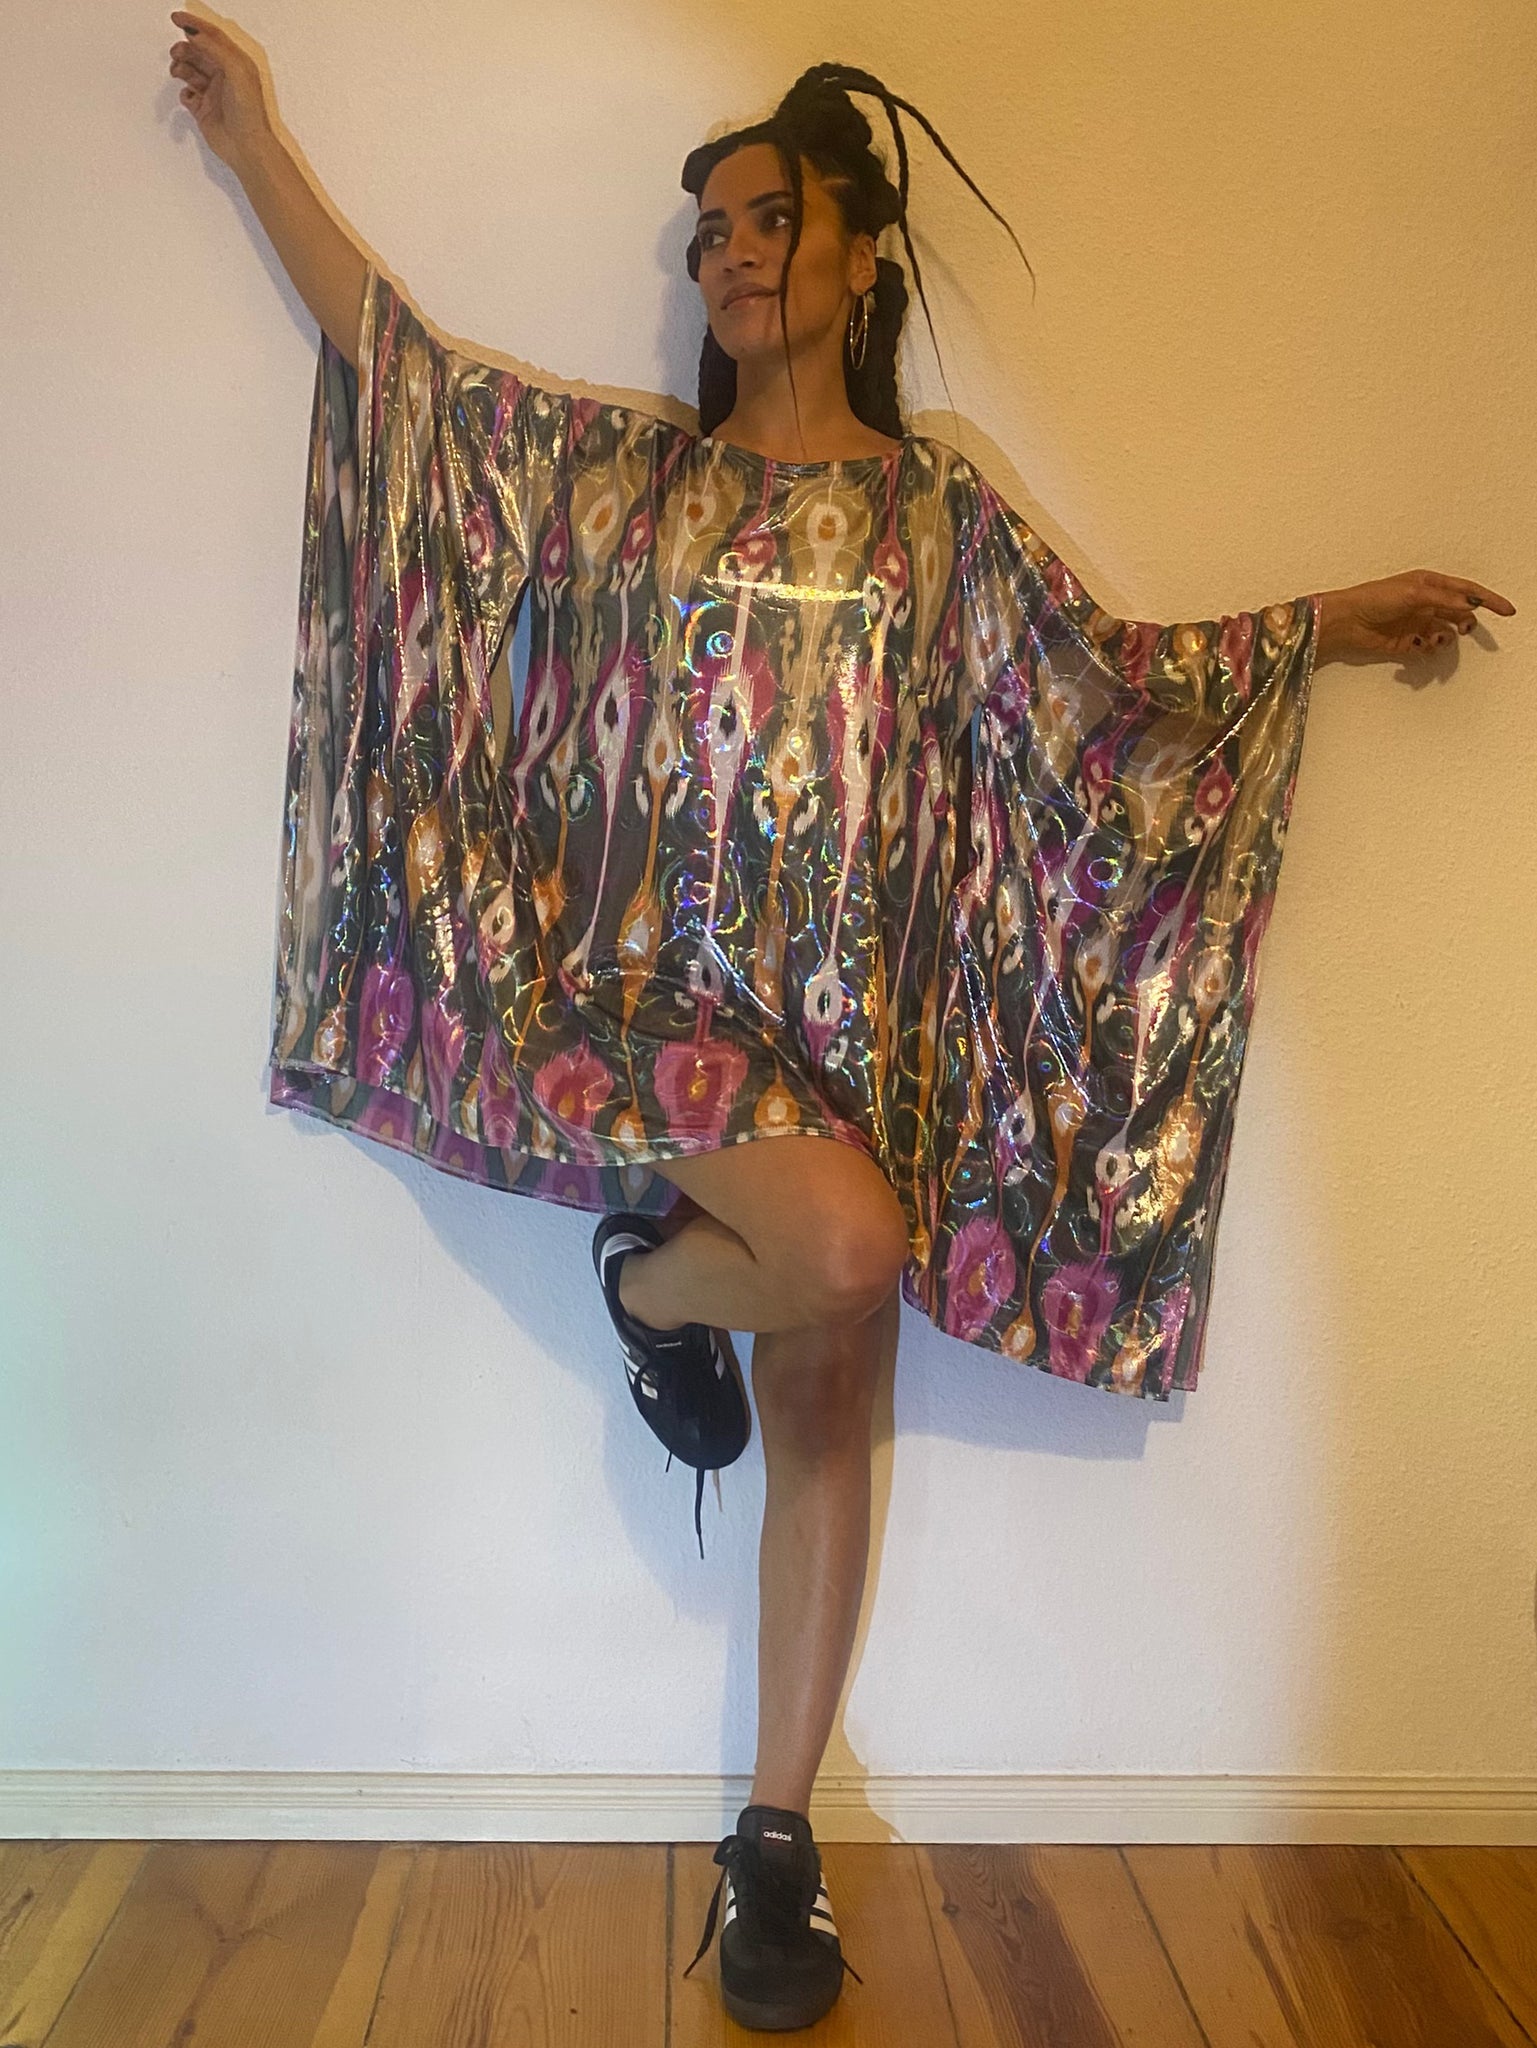 A woman poses against a white wall with a colourful dress, her arms up and one of her legs up.